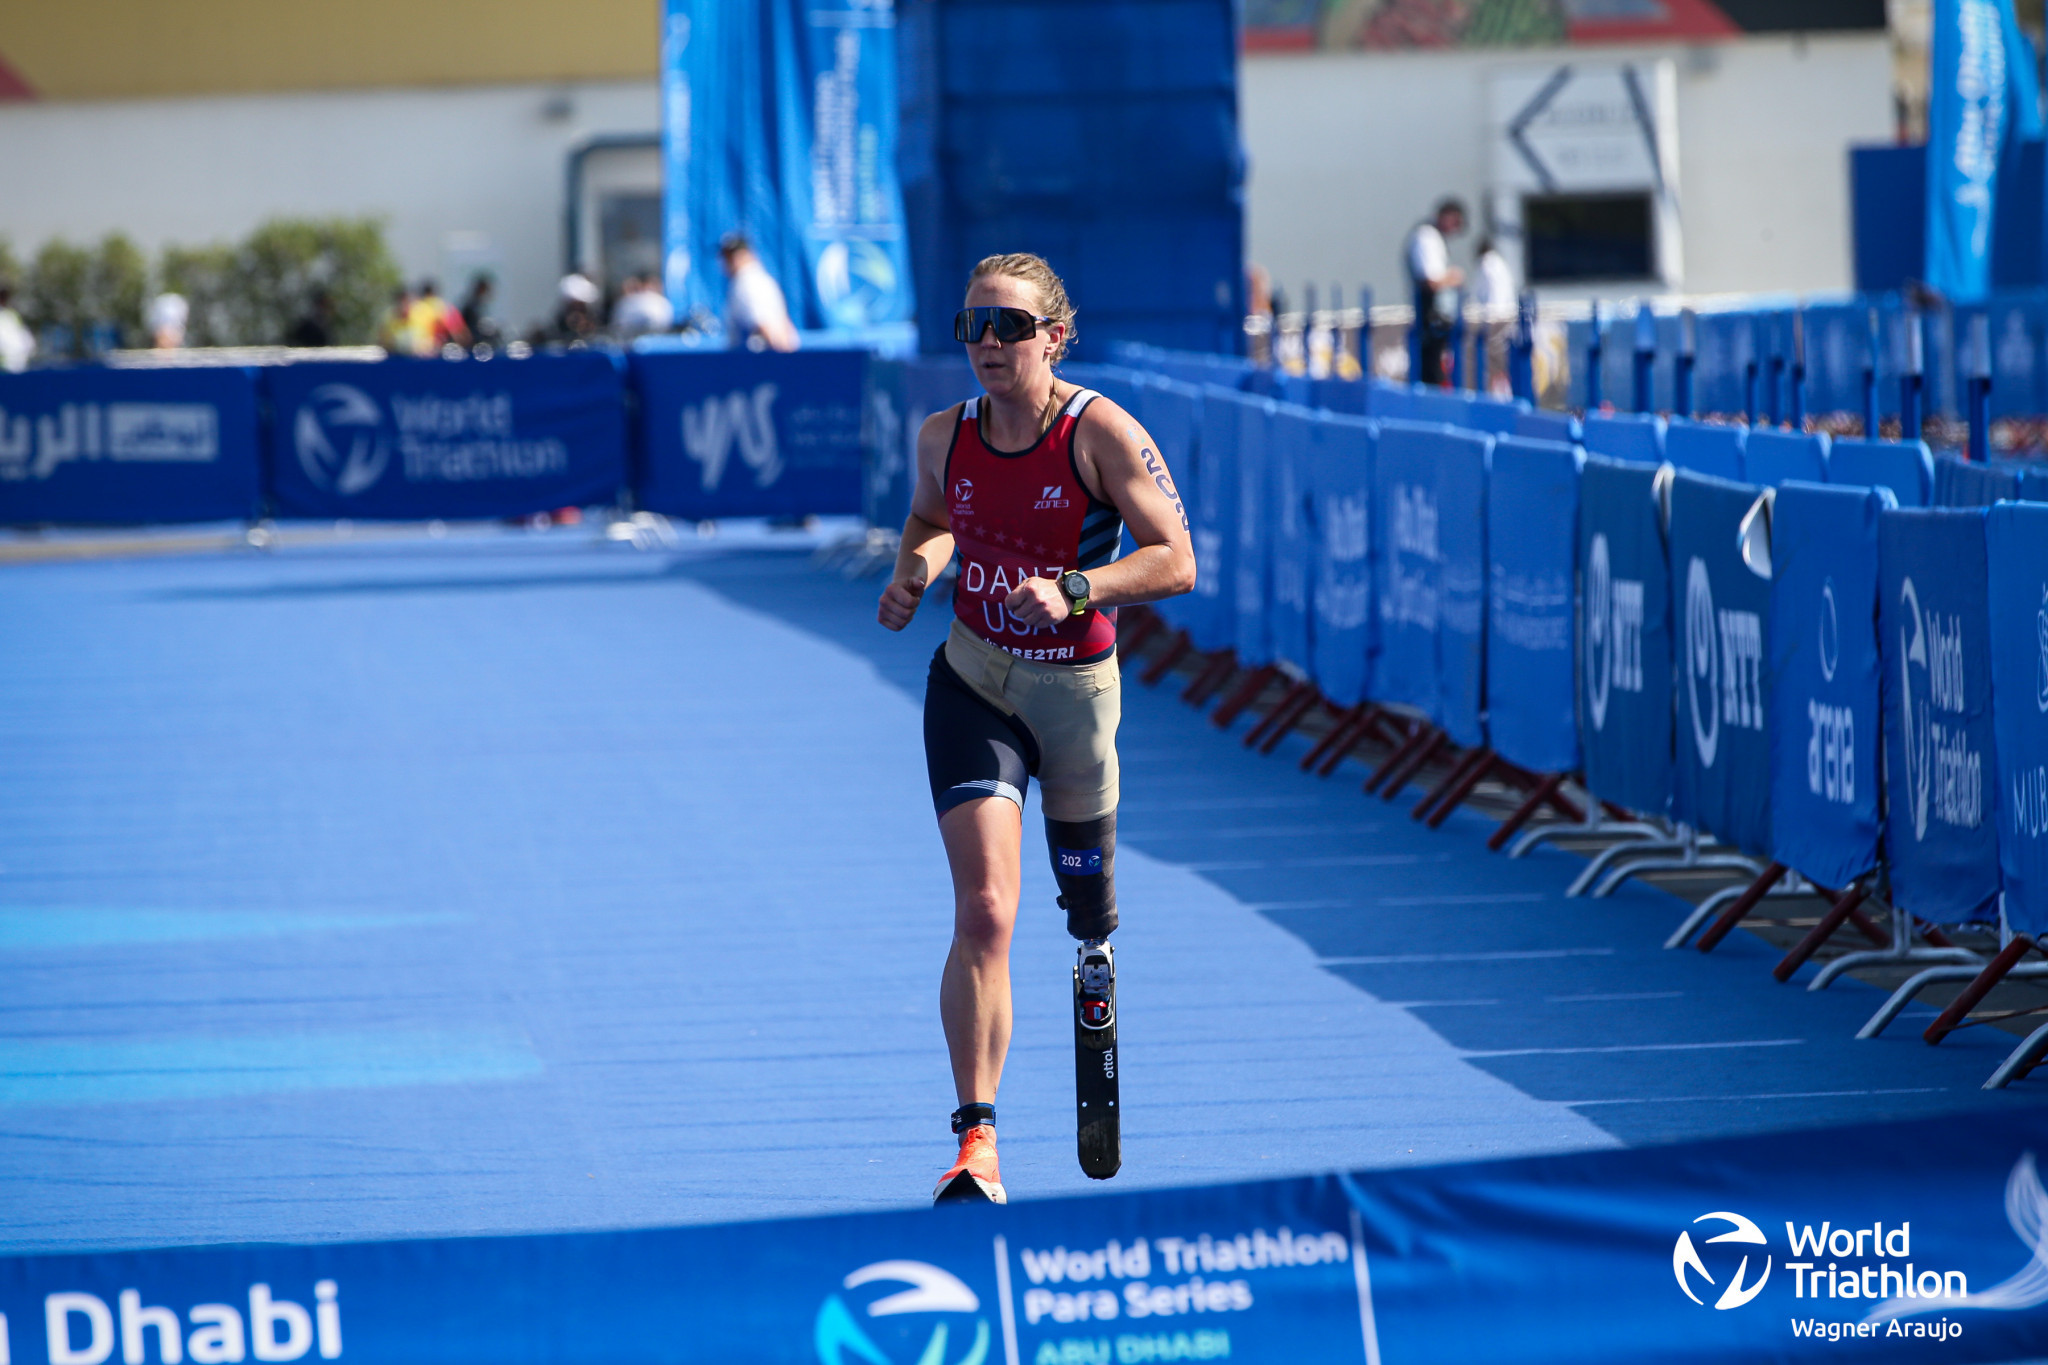 Hailey Danz of the US successfully defended her women's PTS2 title with a dominant performance ©World Triathlon